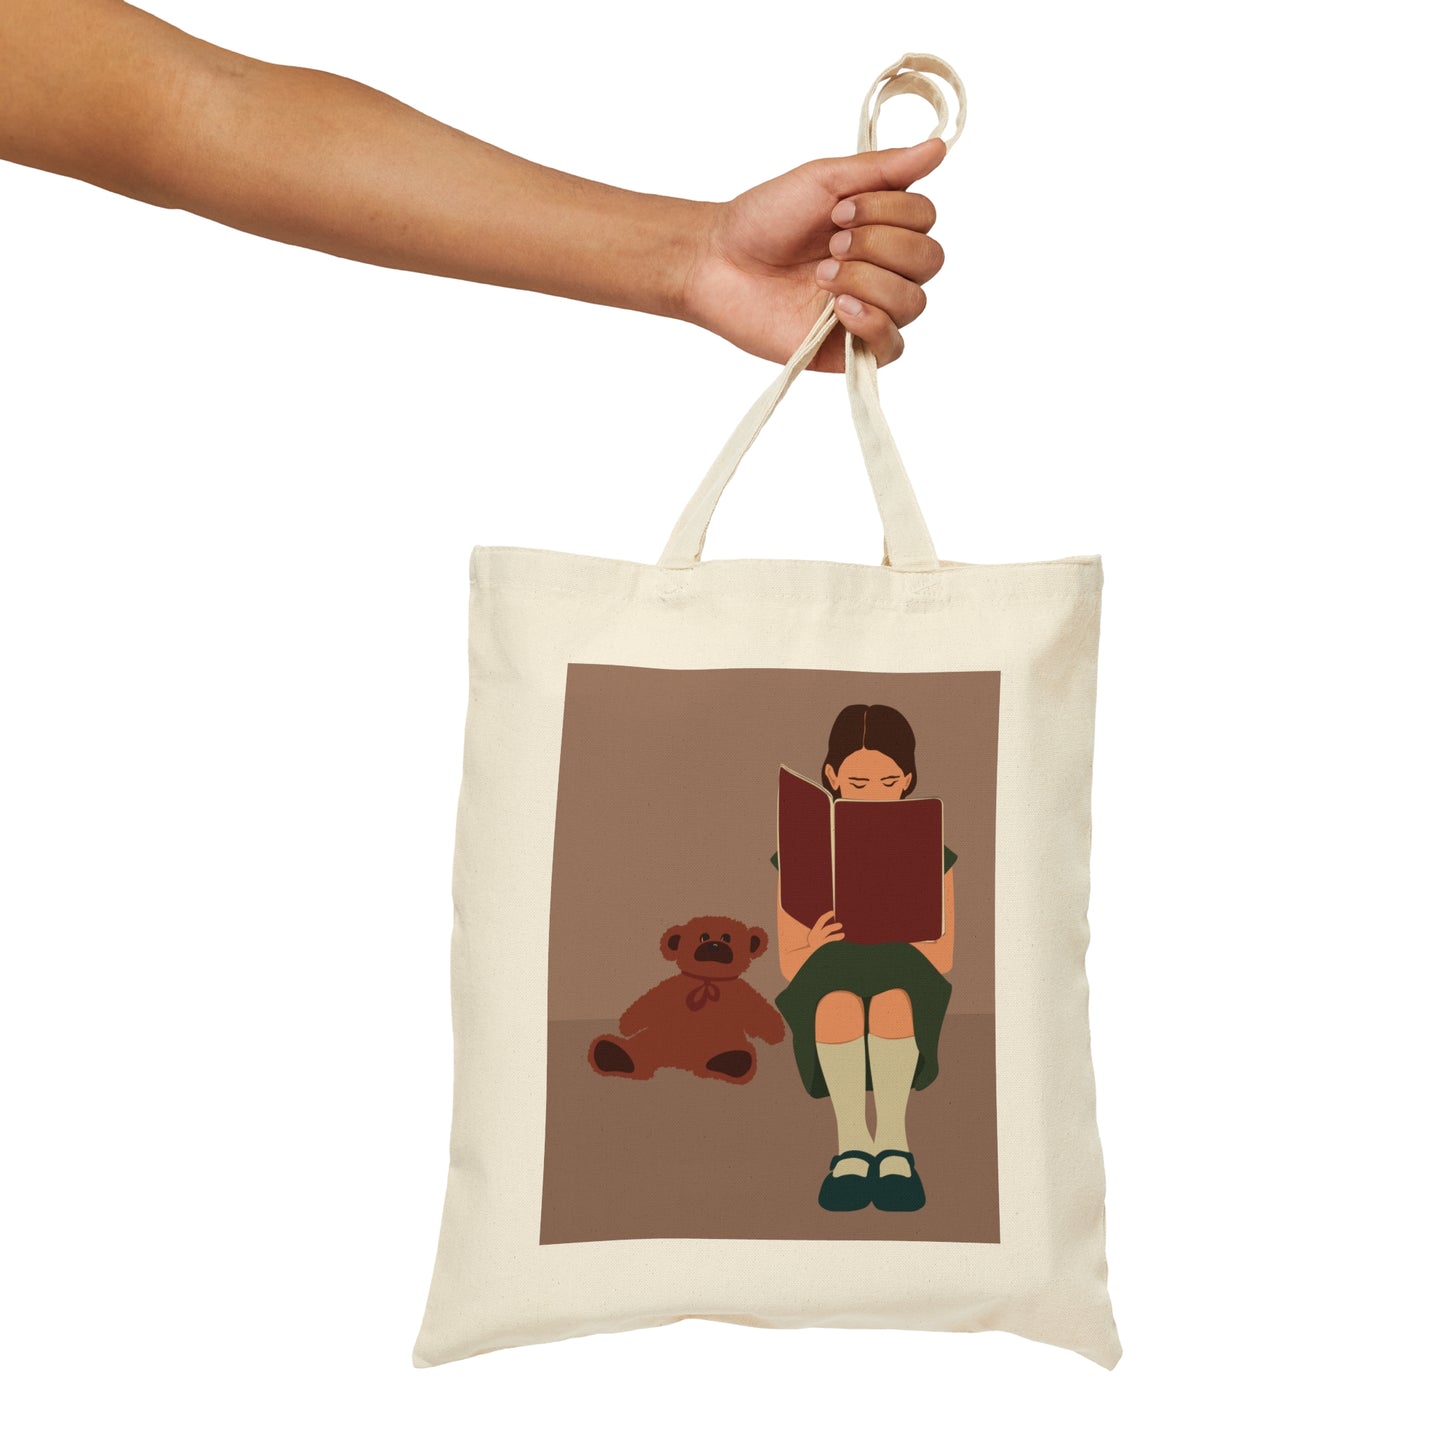 Woman Reading Book with Bear Cozy Cute Art Graphic Canvas Shopping Cotton Tote Bag